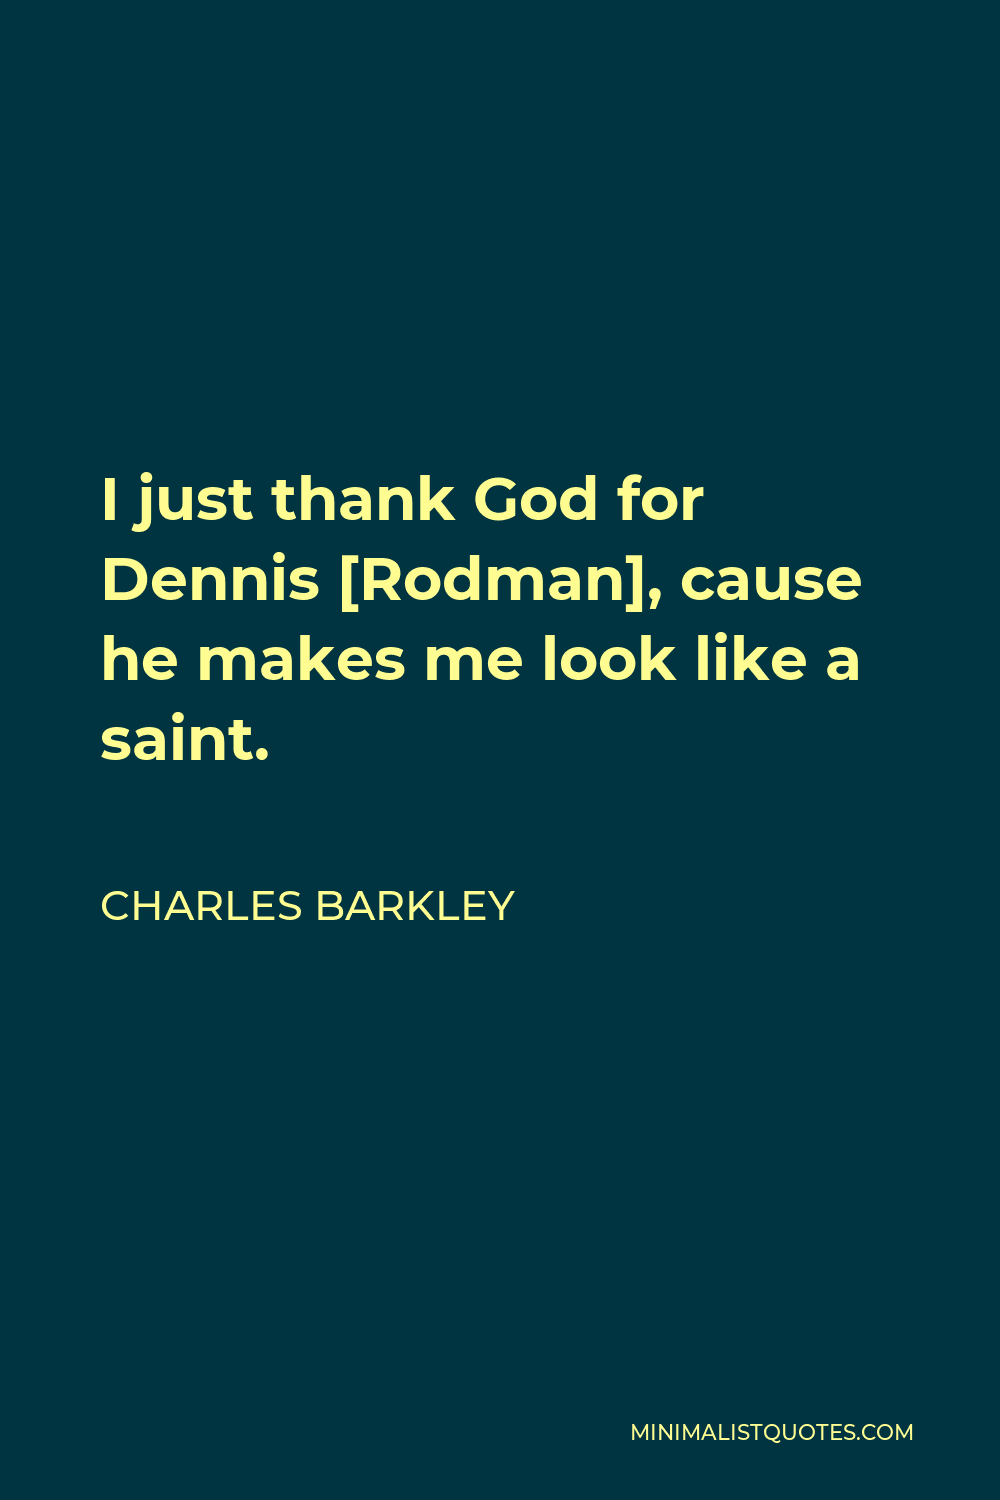 Charles Barkley Quote - I just thank God for Dennis [Rodman], cause he makes me look like a saint.